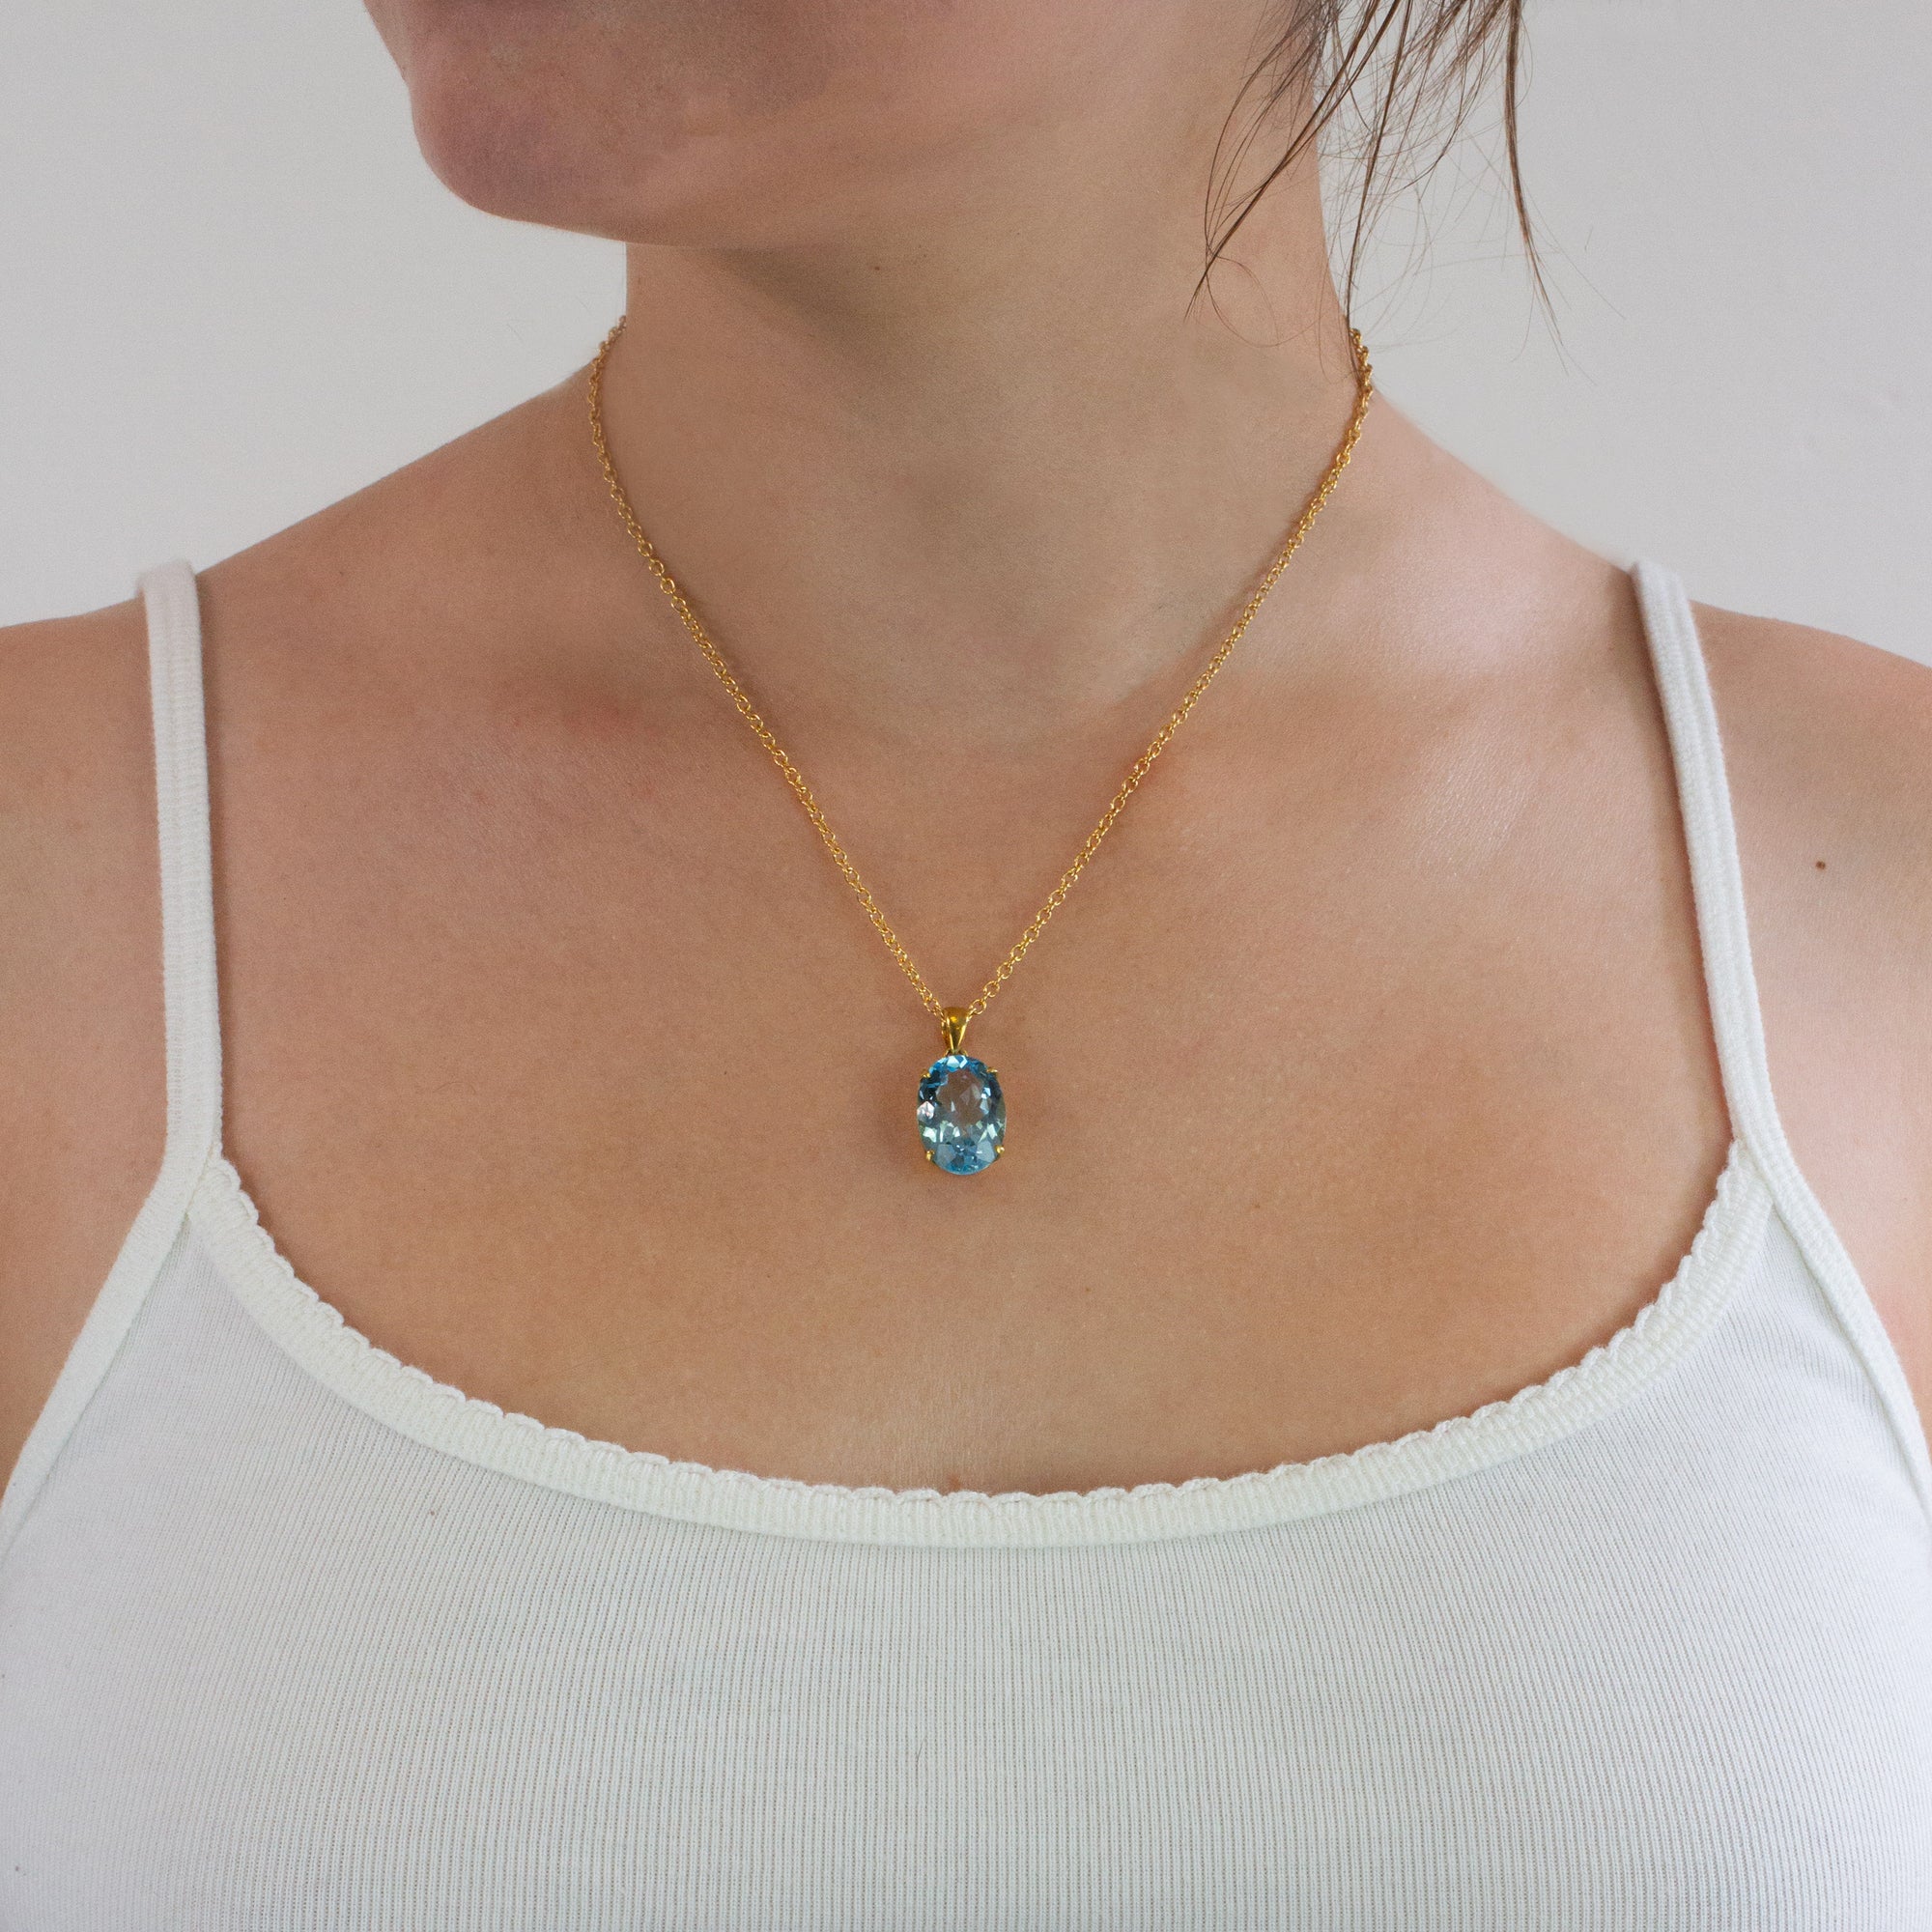 Faceted Oval 14 yellow gold vermeil Blue Topaz necklace